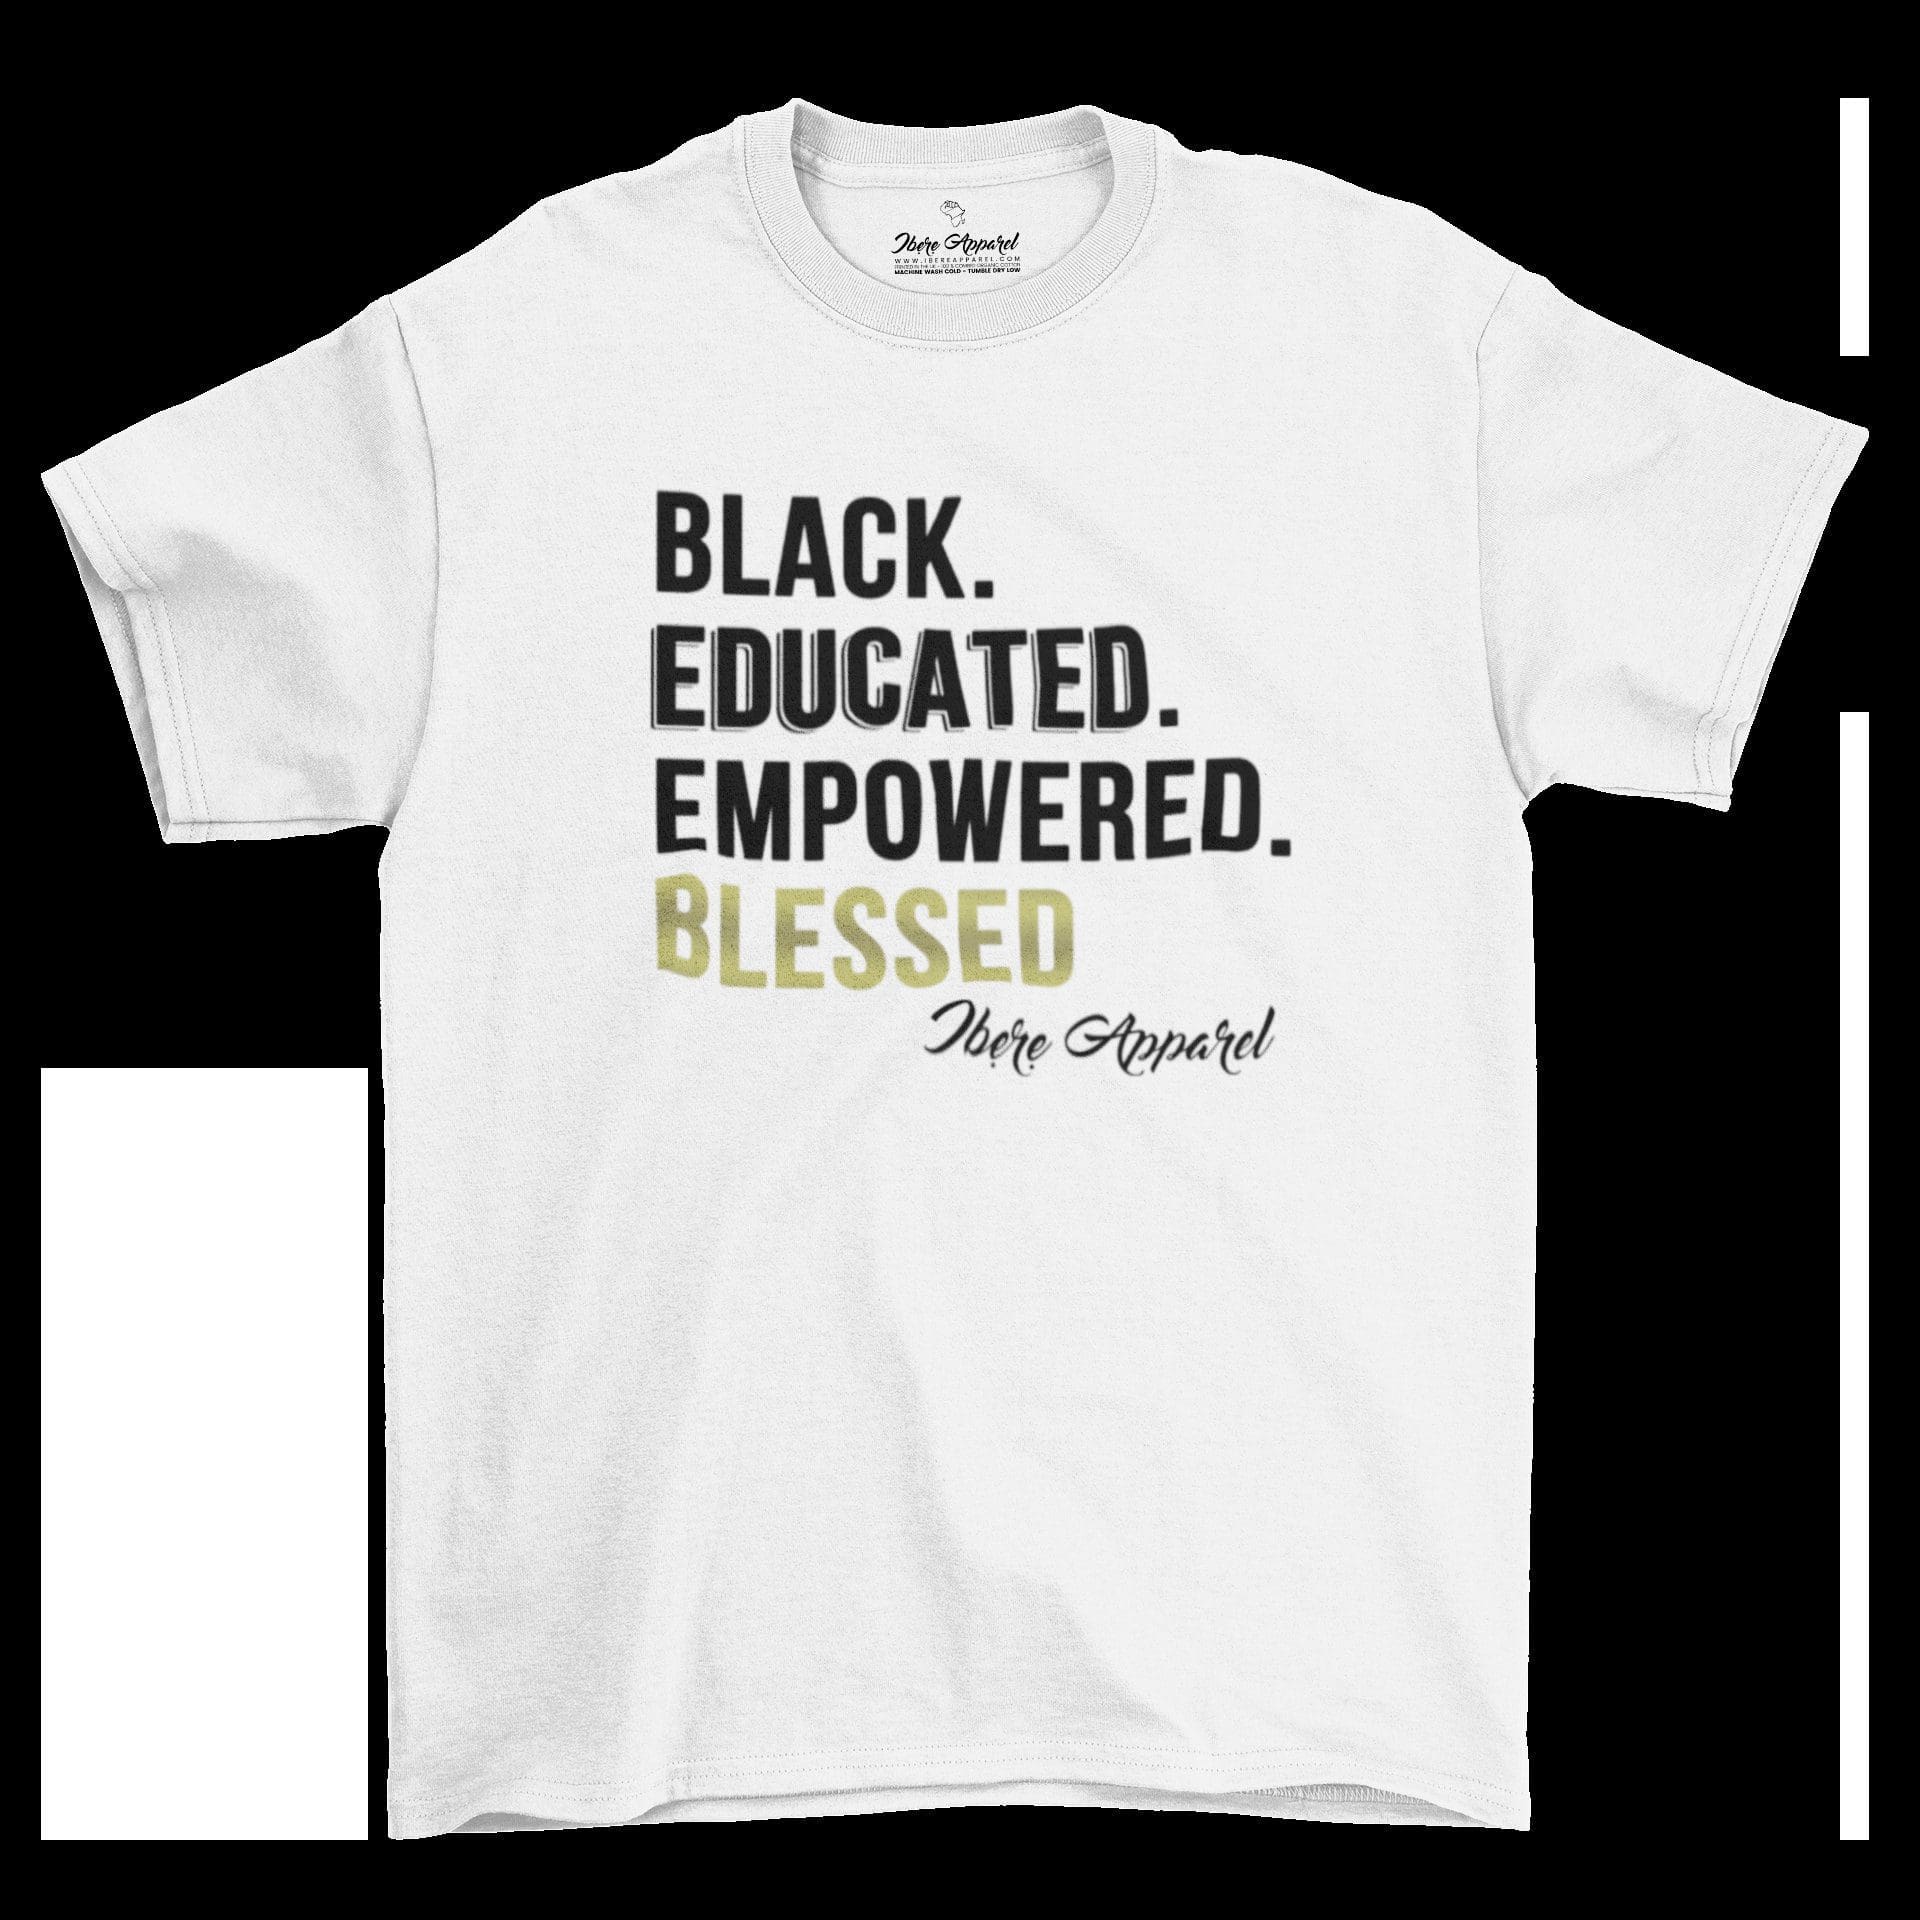 BLESSED Unisex T-shirt, wakuda, african print fans, black-owned brands, black pound day